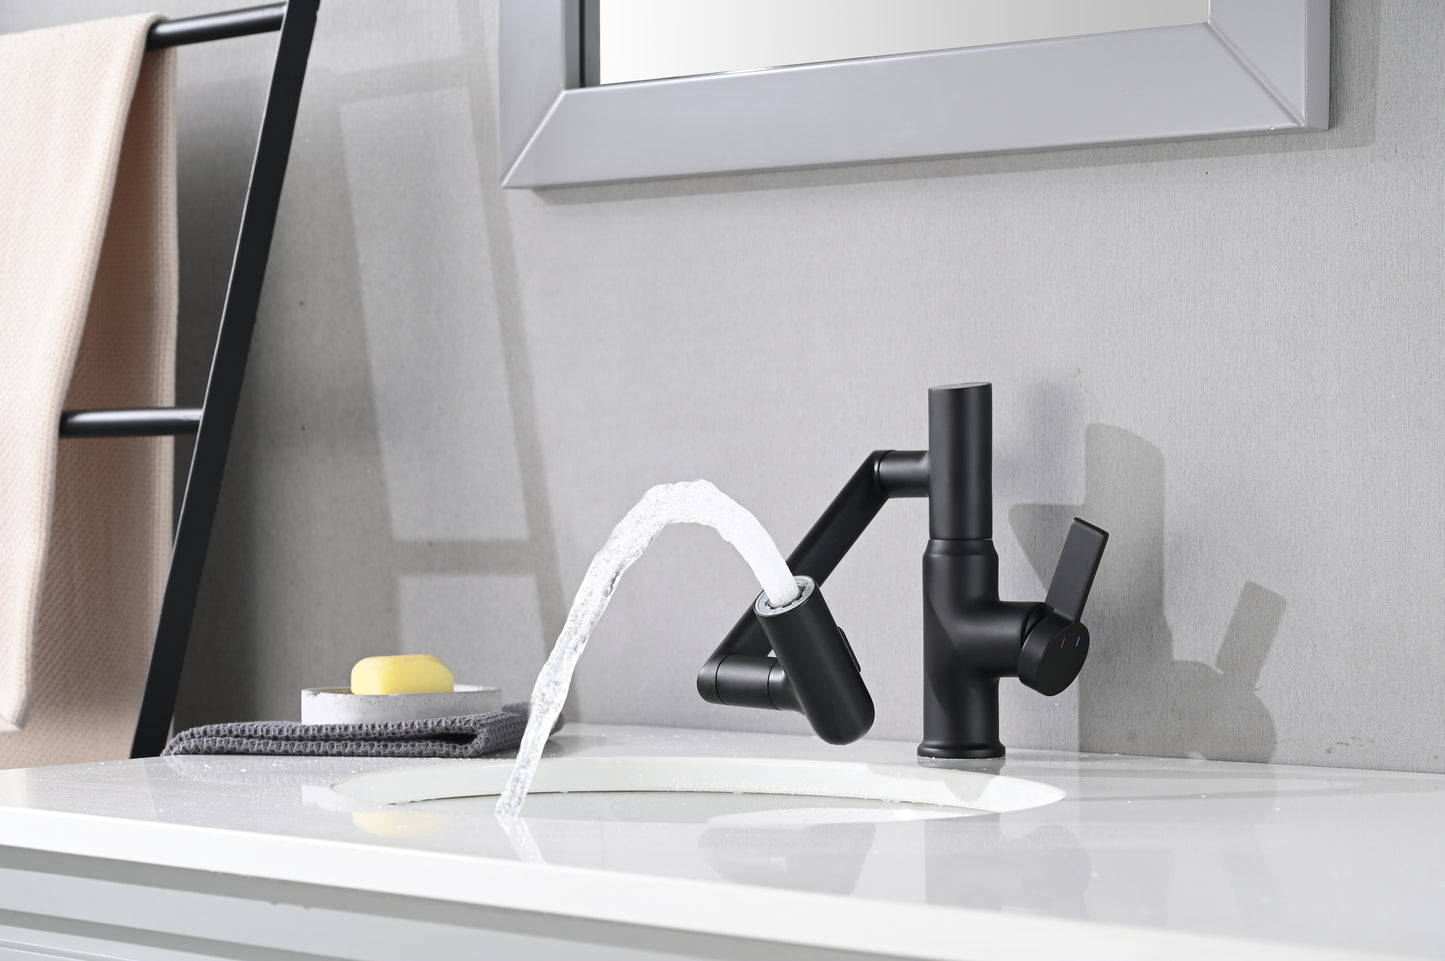 Matte Black Bathroom Sink Faucet with Temperature Display and 360° Rotary Movement featuring Spray Function and Anti-Skid Switch